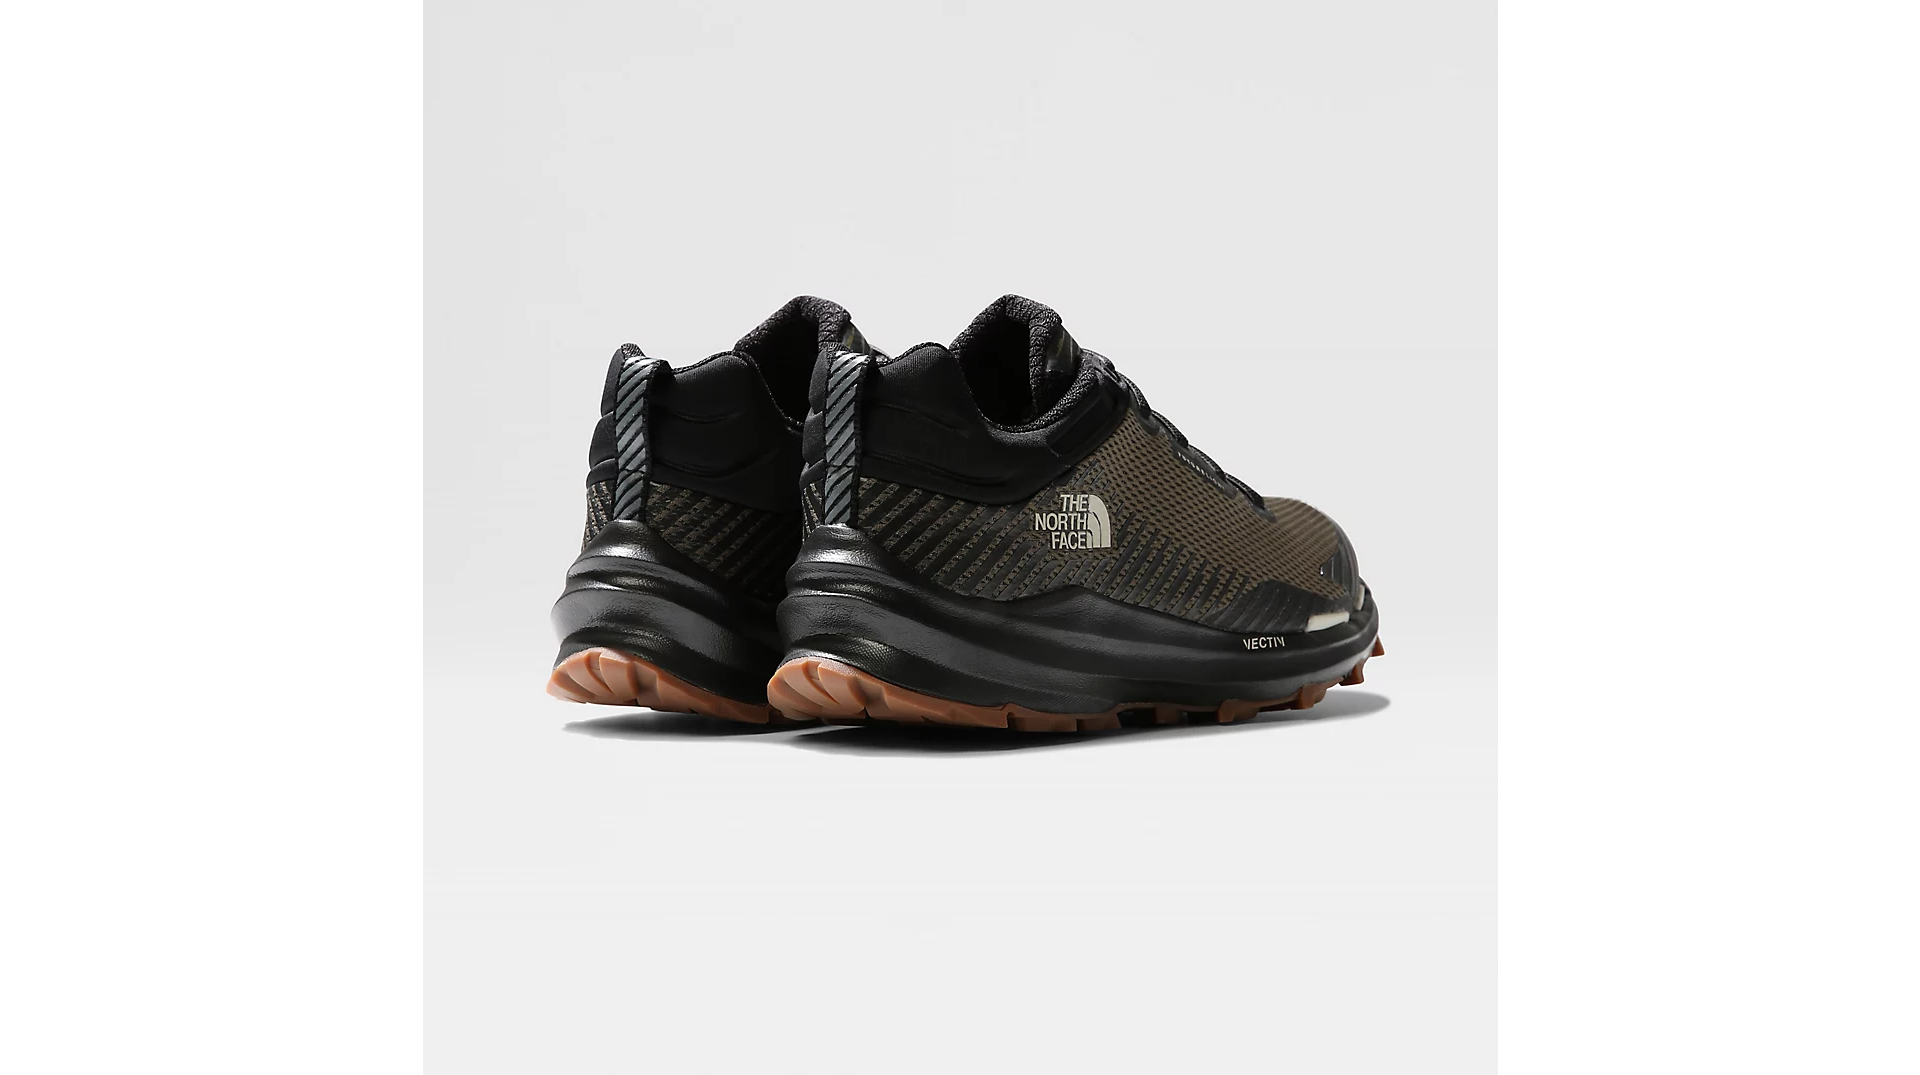 The North Face Mens Vectiv Fastpack Futurelight Shoe